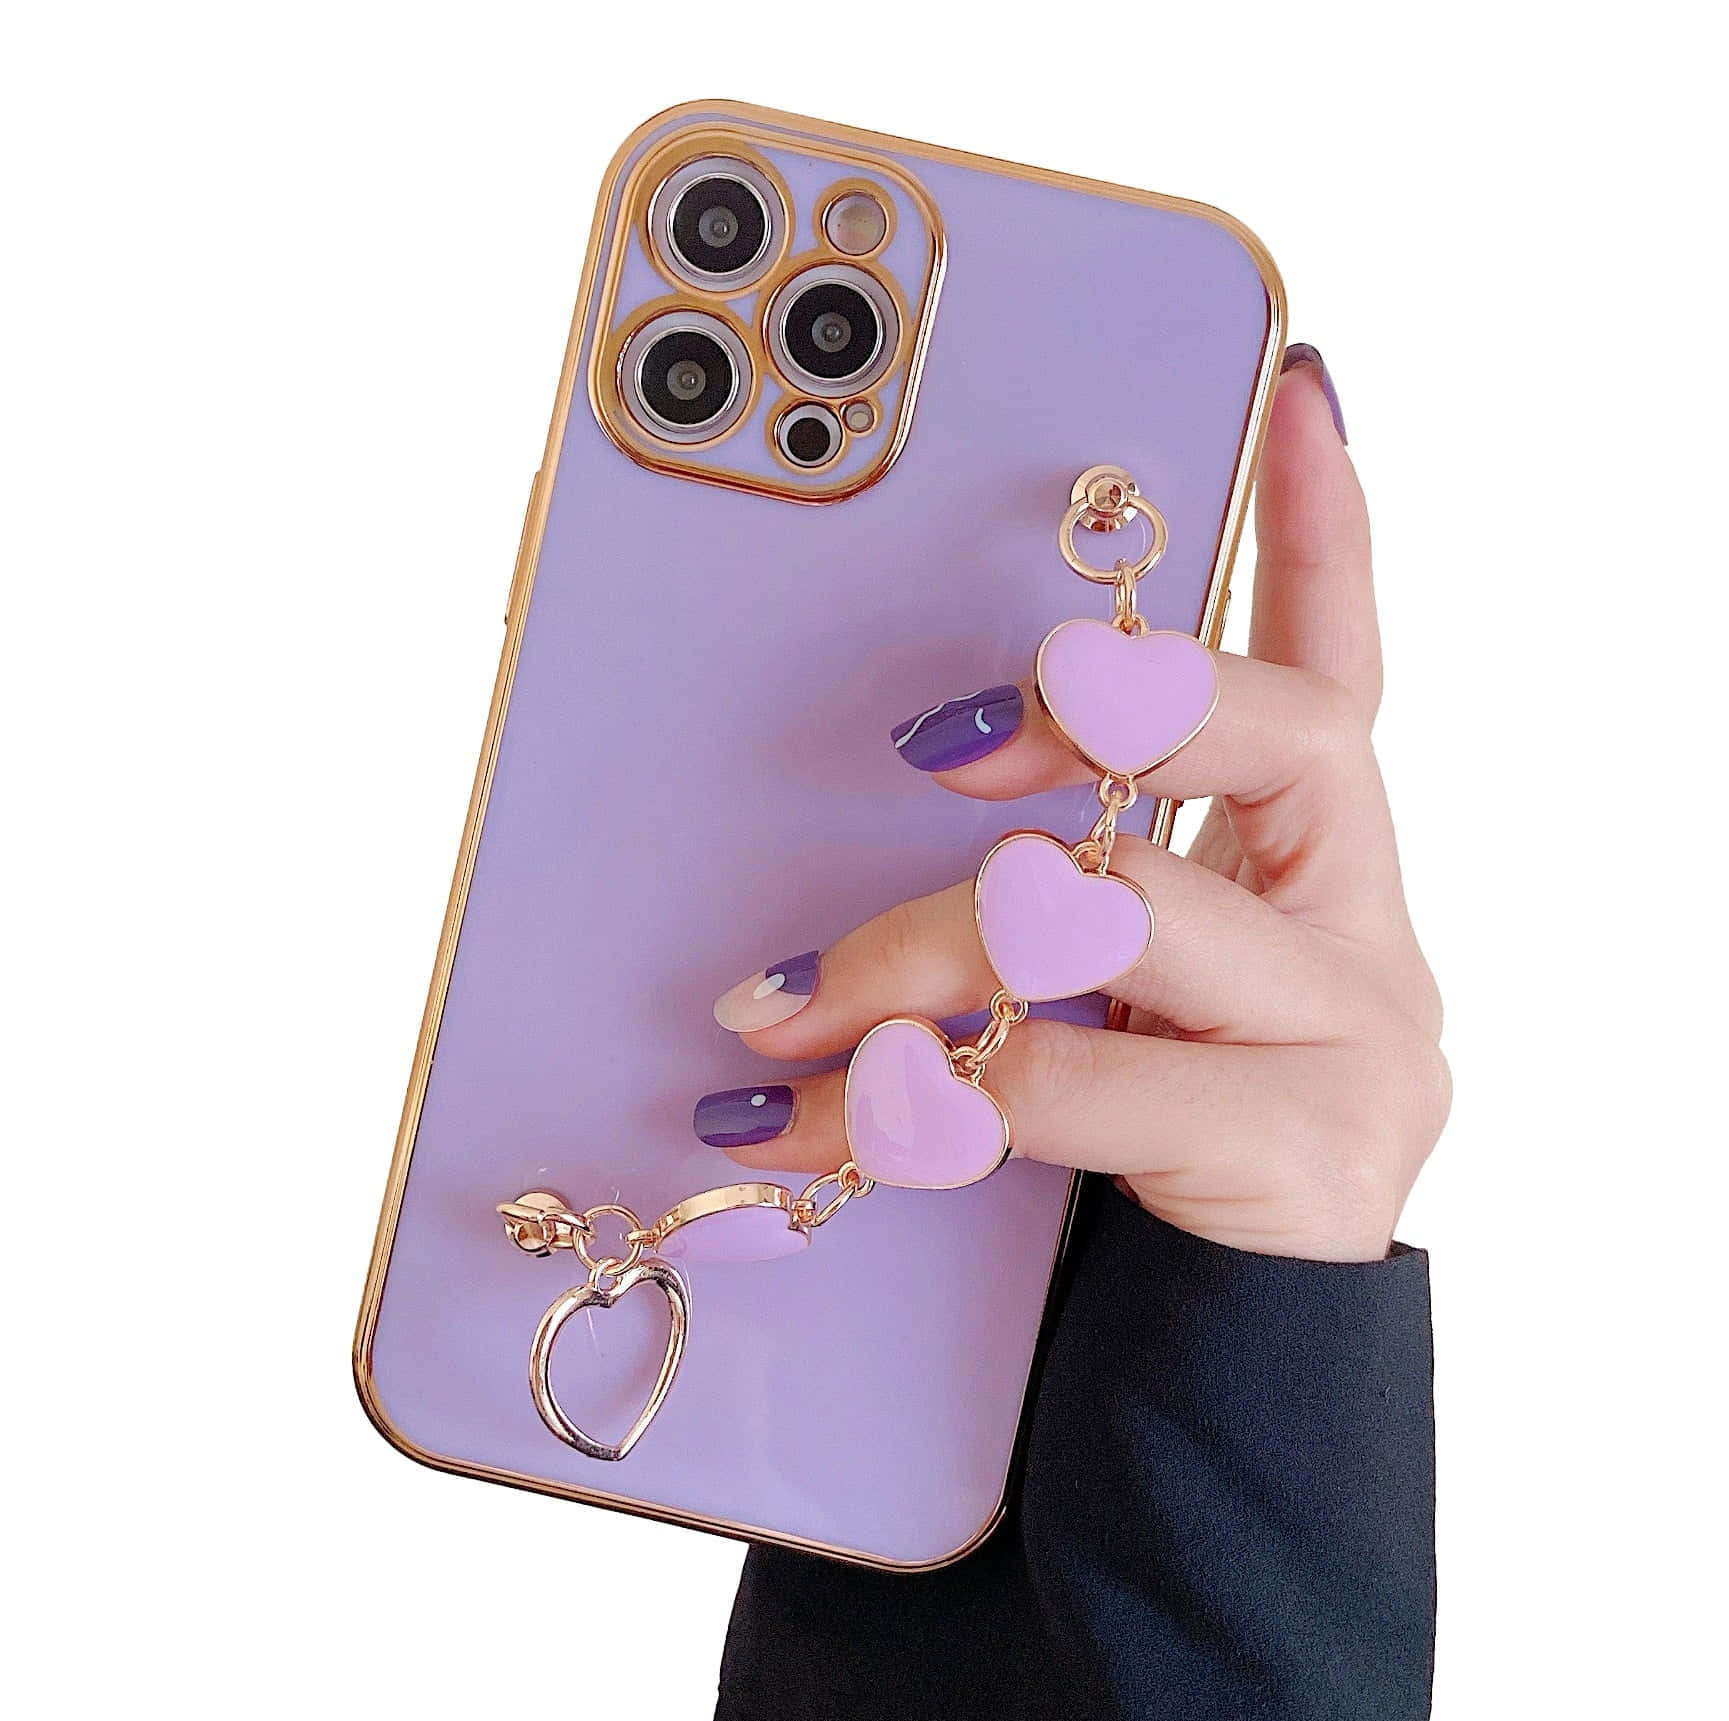 Adorable and modern, this cute iPhone is the perfect accessory.